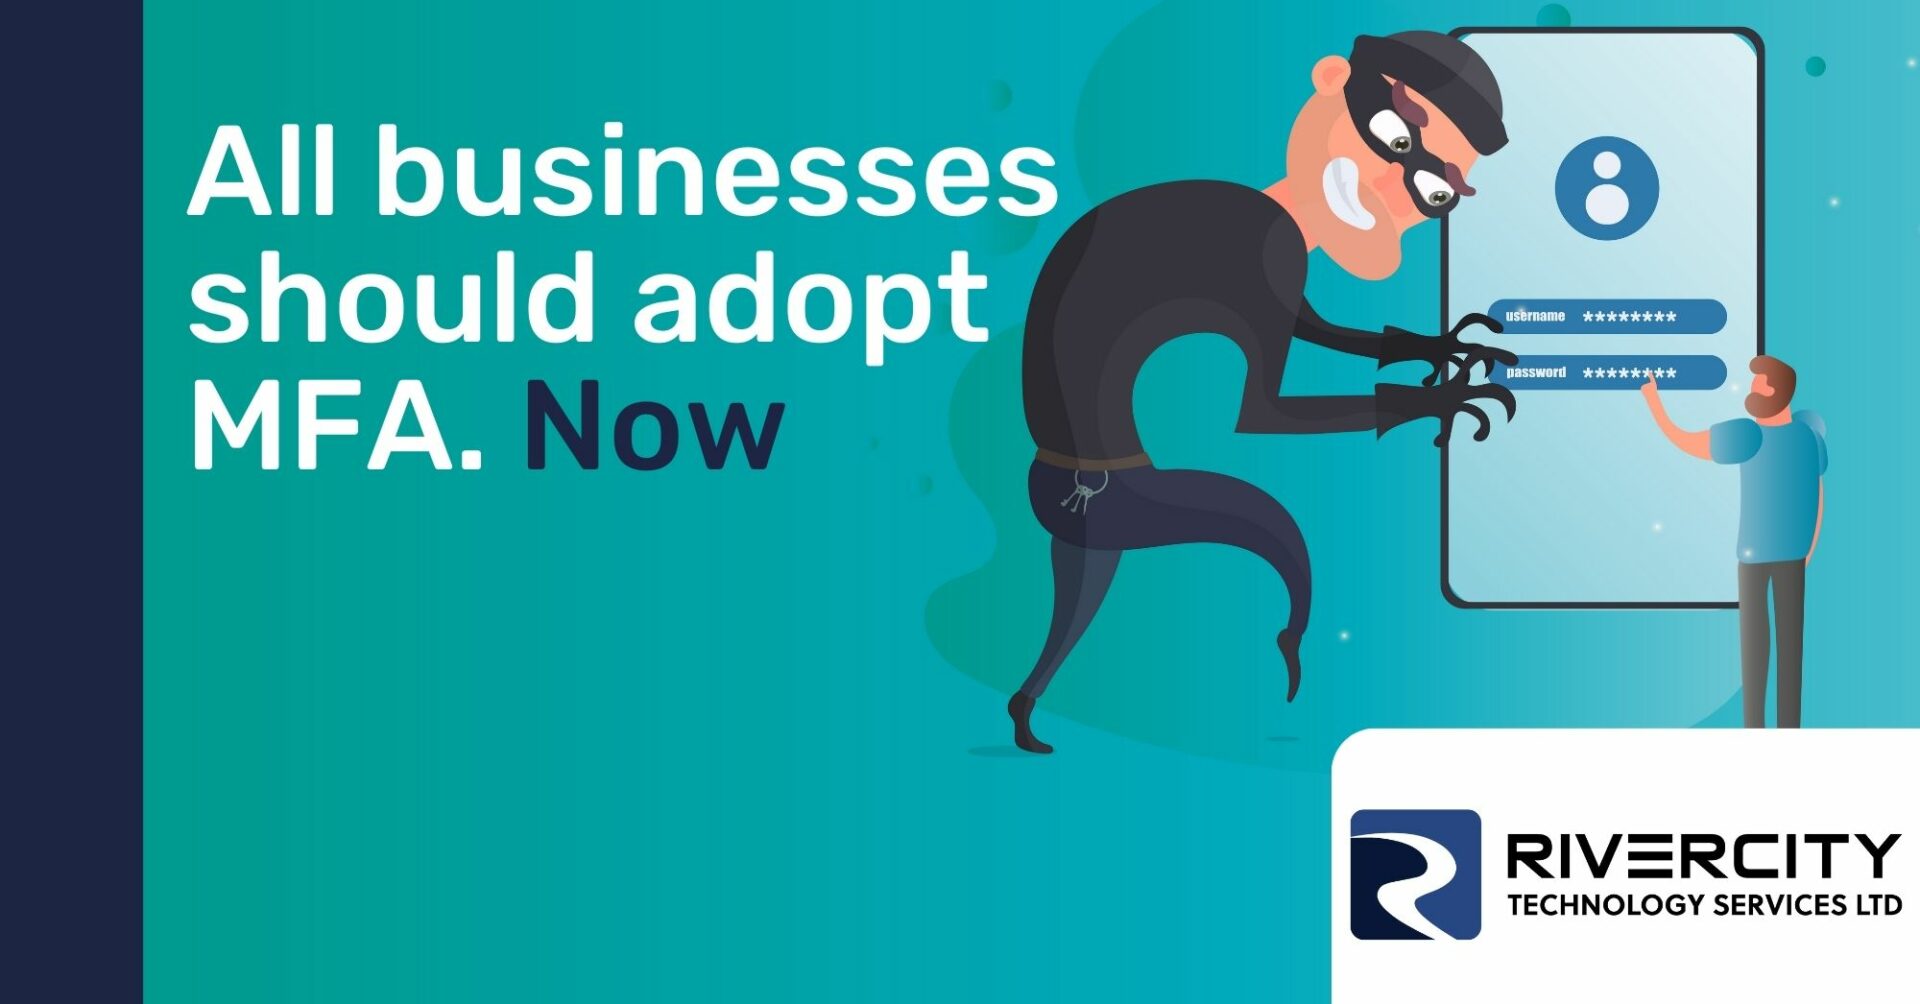 Promotional banner with the text "All Businesses should adopt MFA Now"